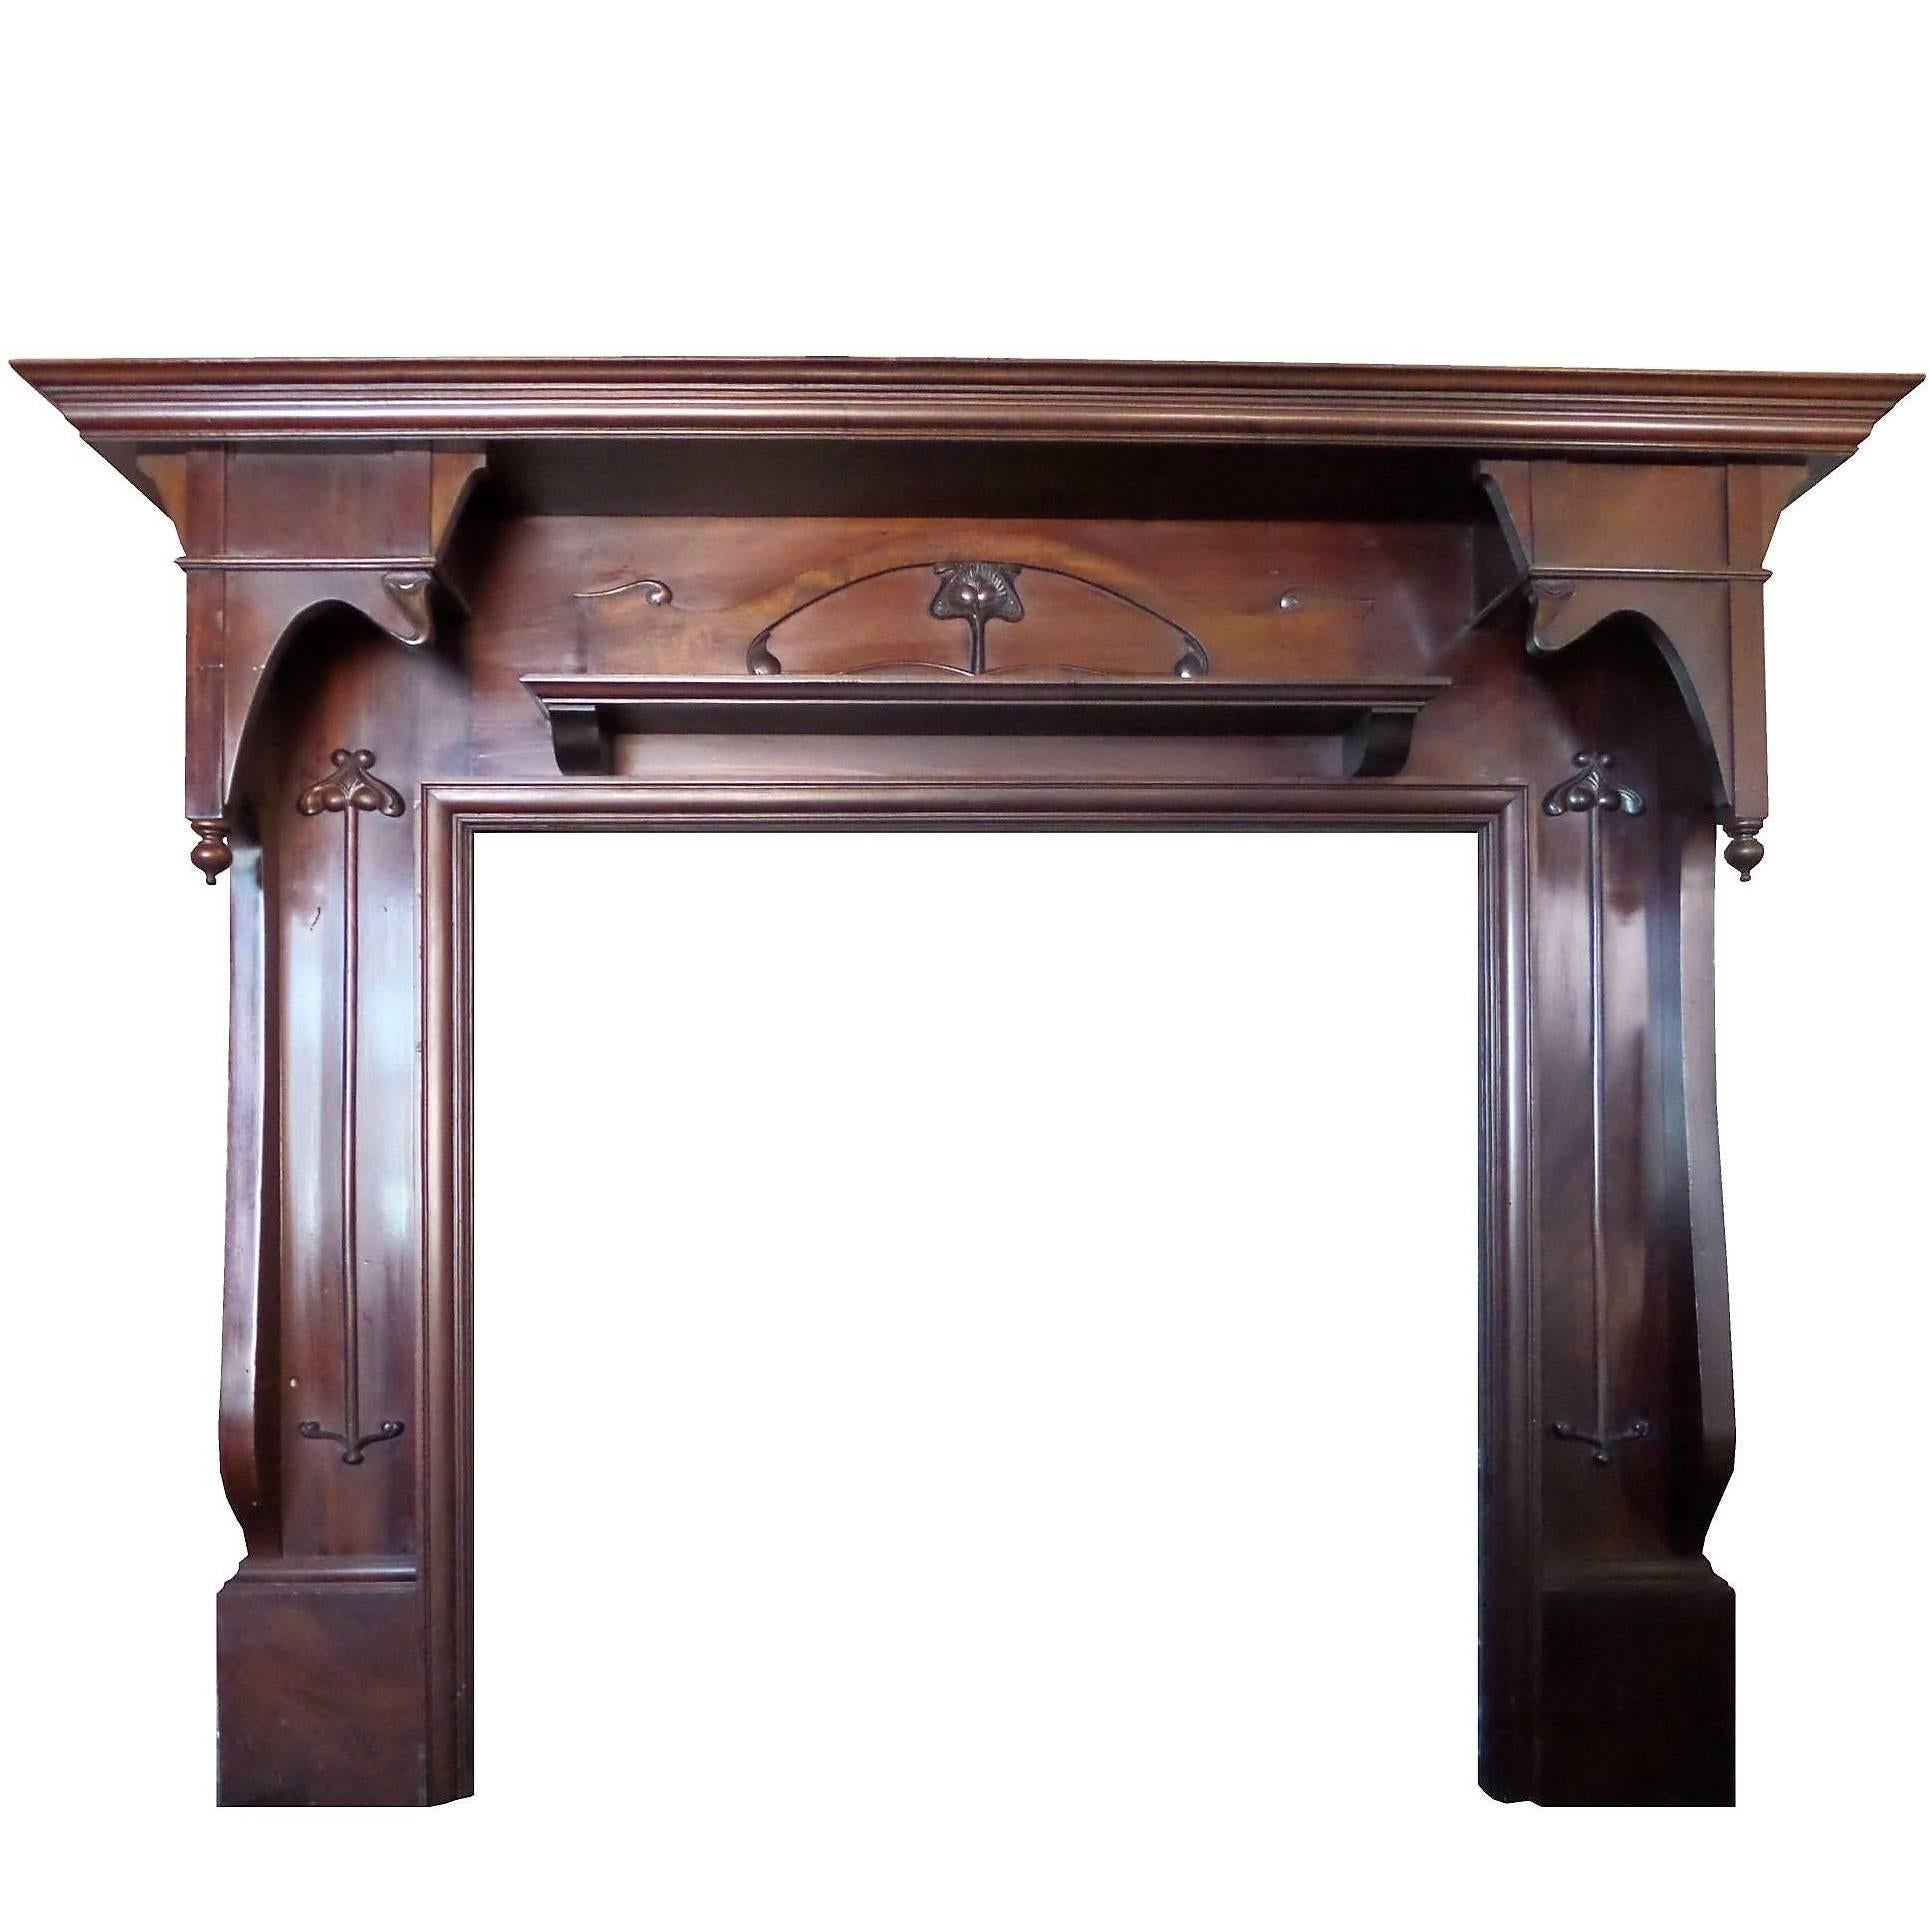 Early 20th Century Art Nouveau Large Mahogany Wood Fireplace Mantel For Sale